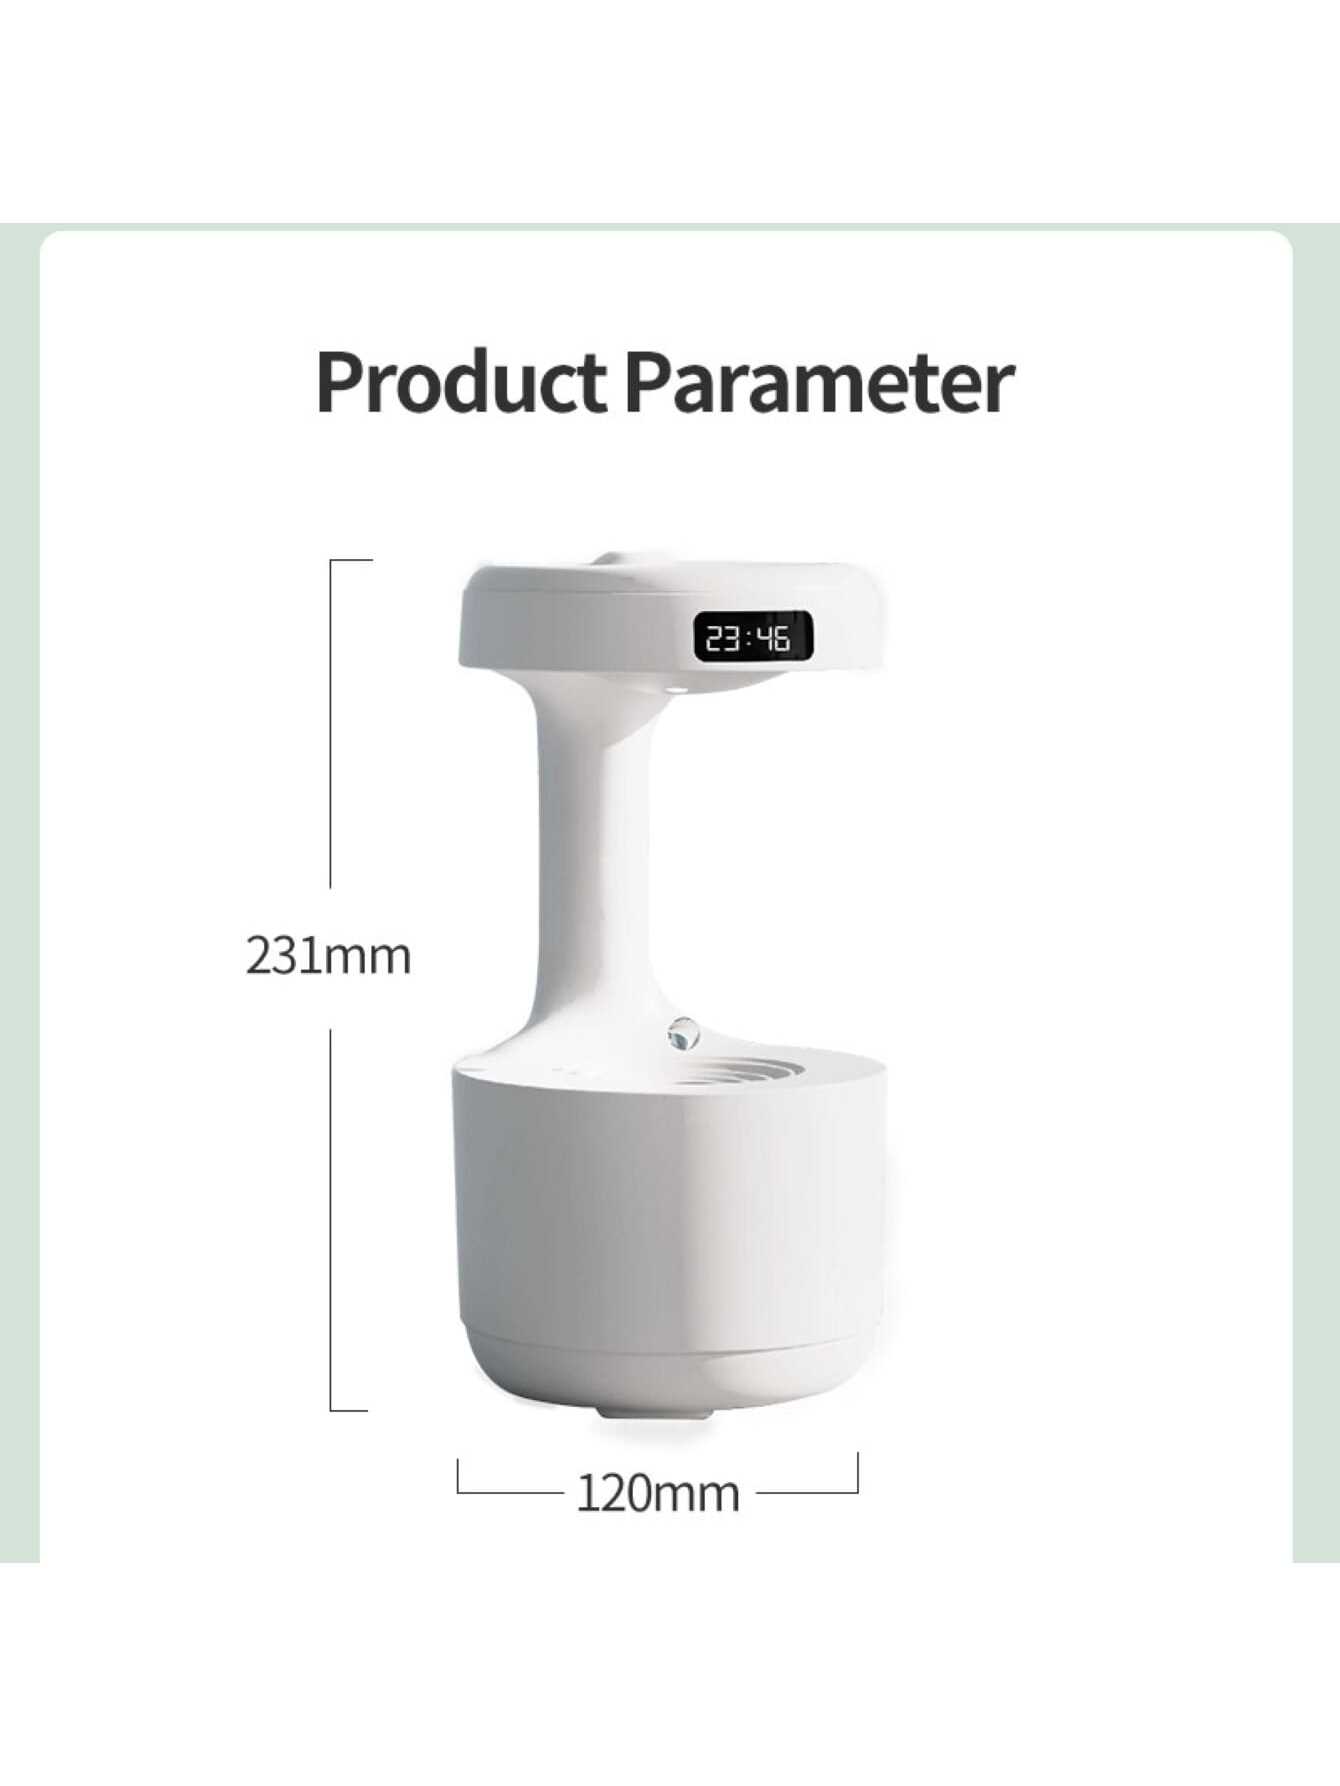 1pc 800ml Usb-powered Aroma Humidifier Lz599-1, With Anti-gravity Water Droplet Backflow Design, Suitable For Home And Office Humidification-light green-9